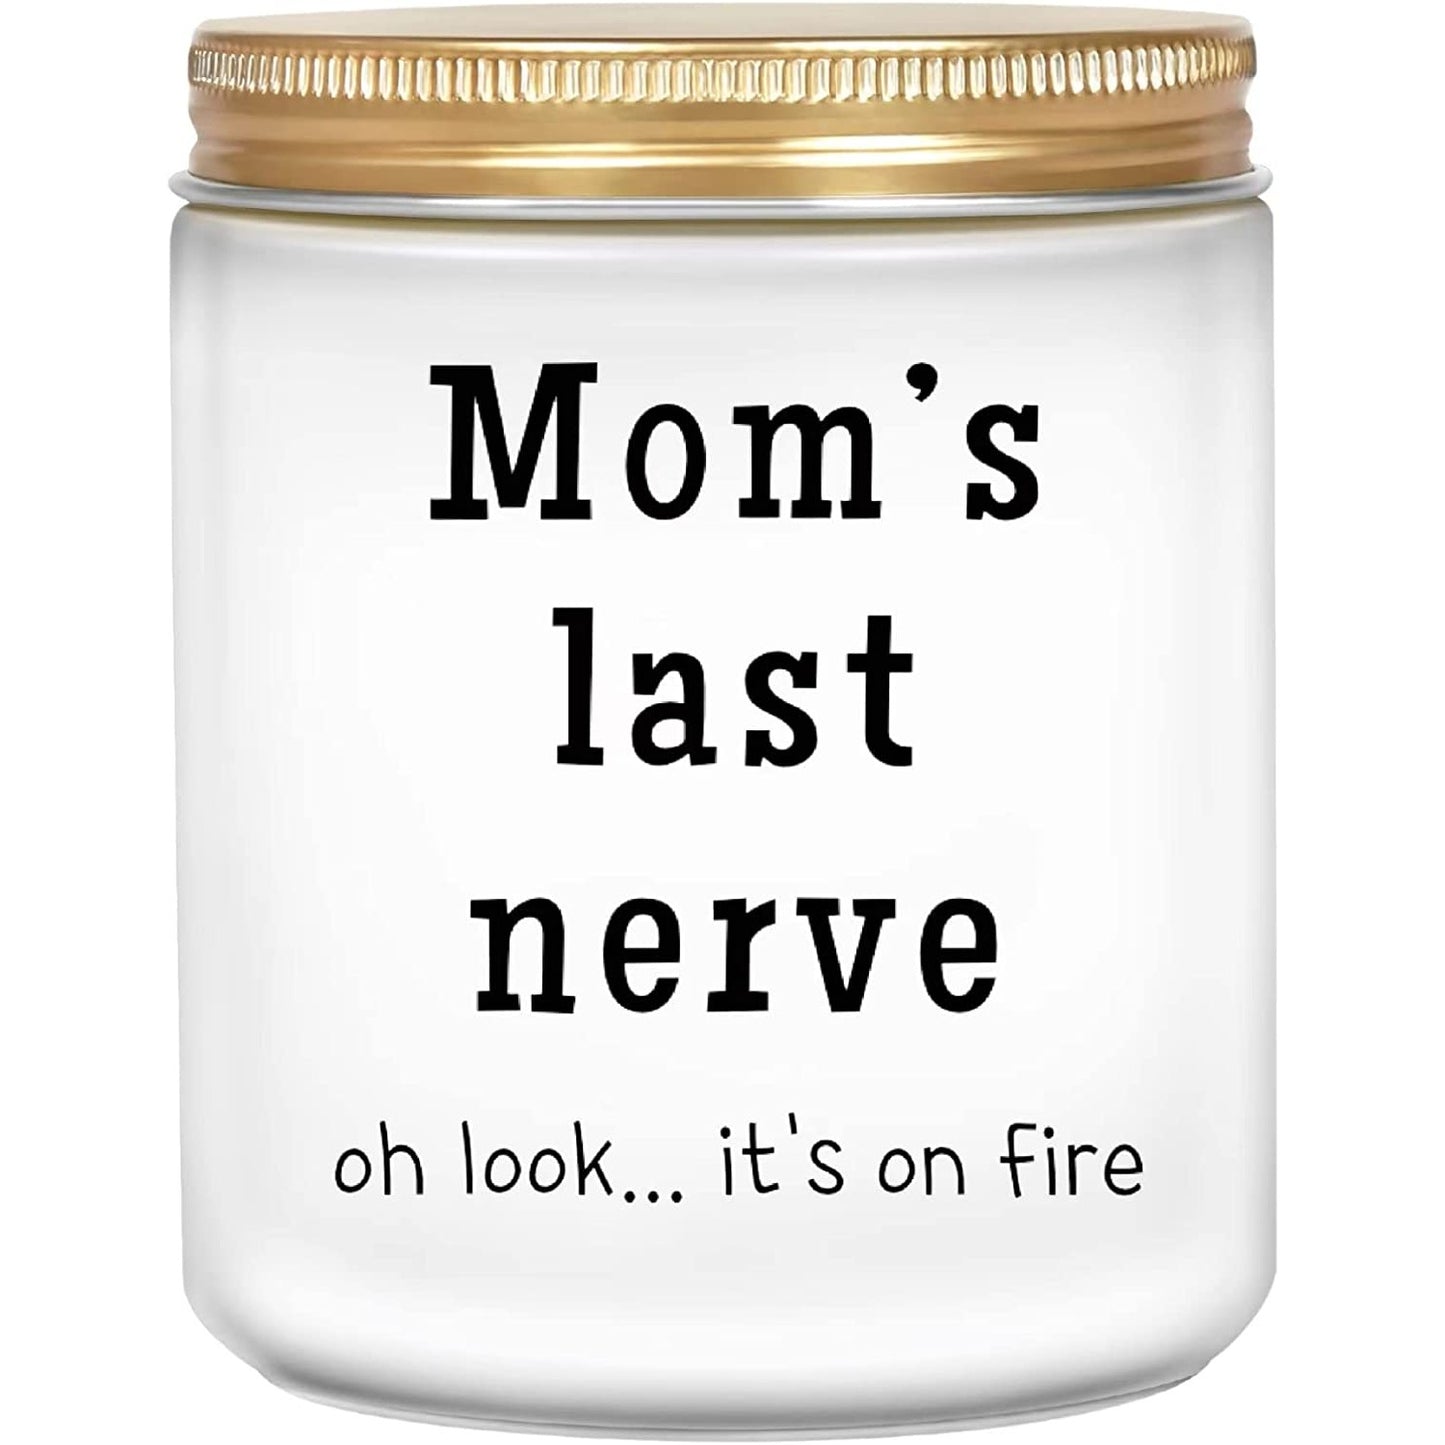 A funny white candle in a jar. On the outside of the candle printed on the jar it says, 'Moms last nerve, oh look... its on fire.'